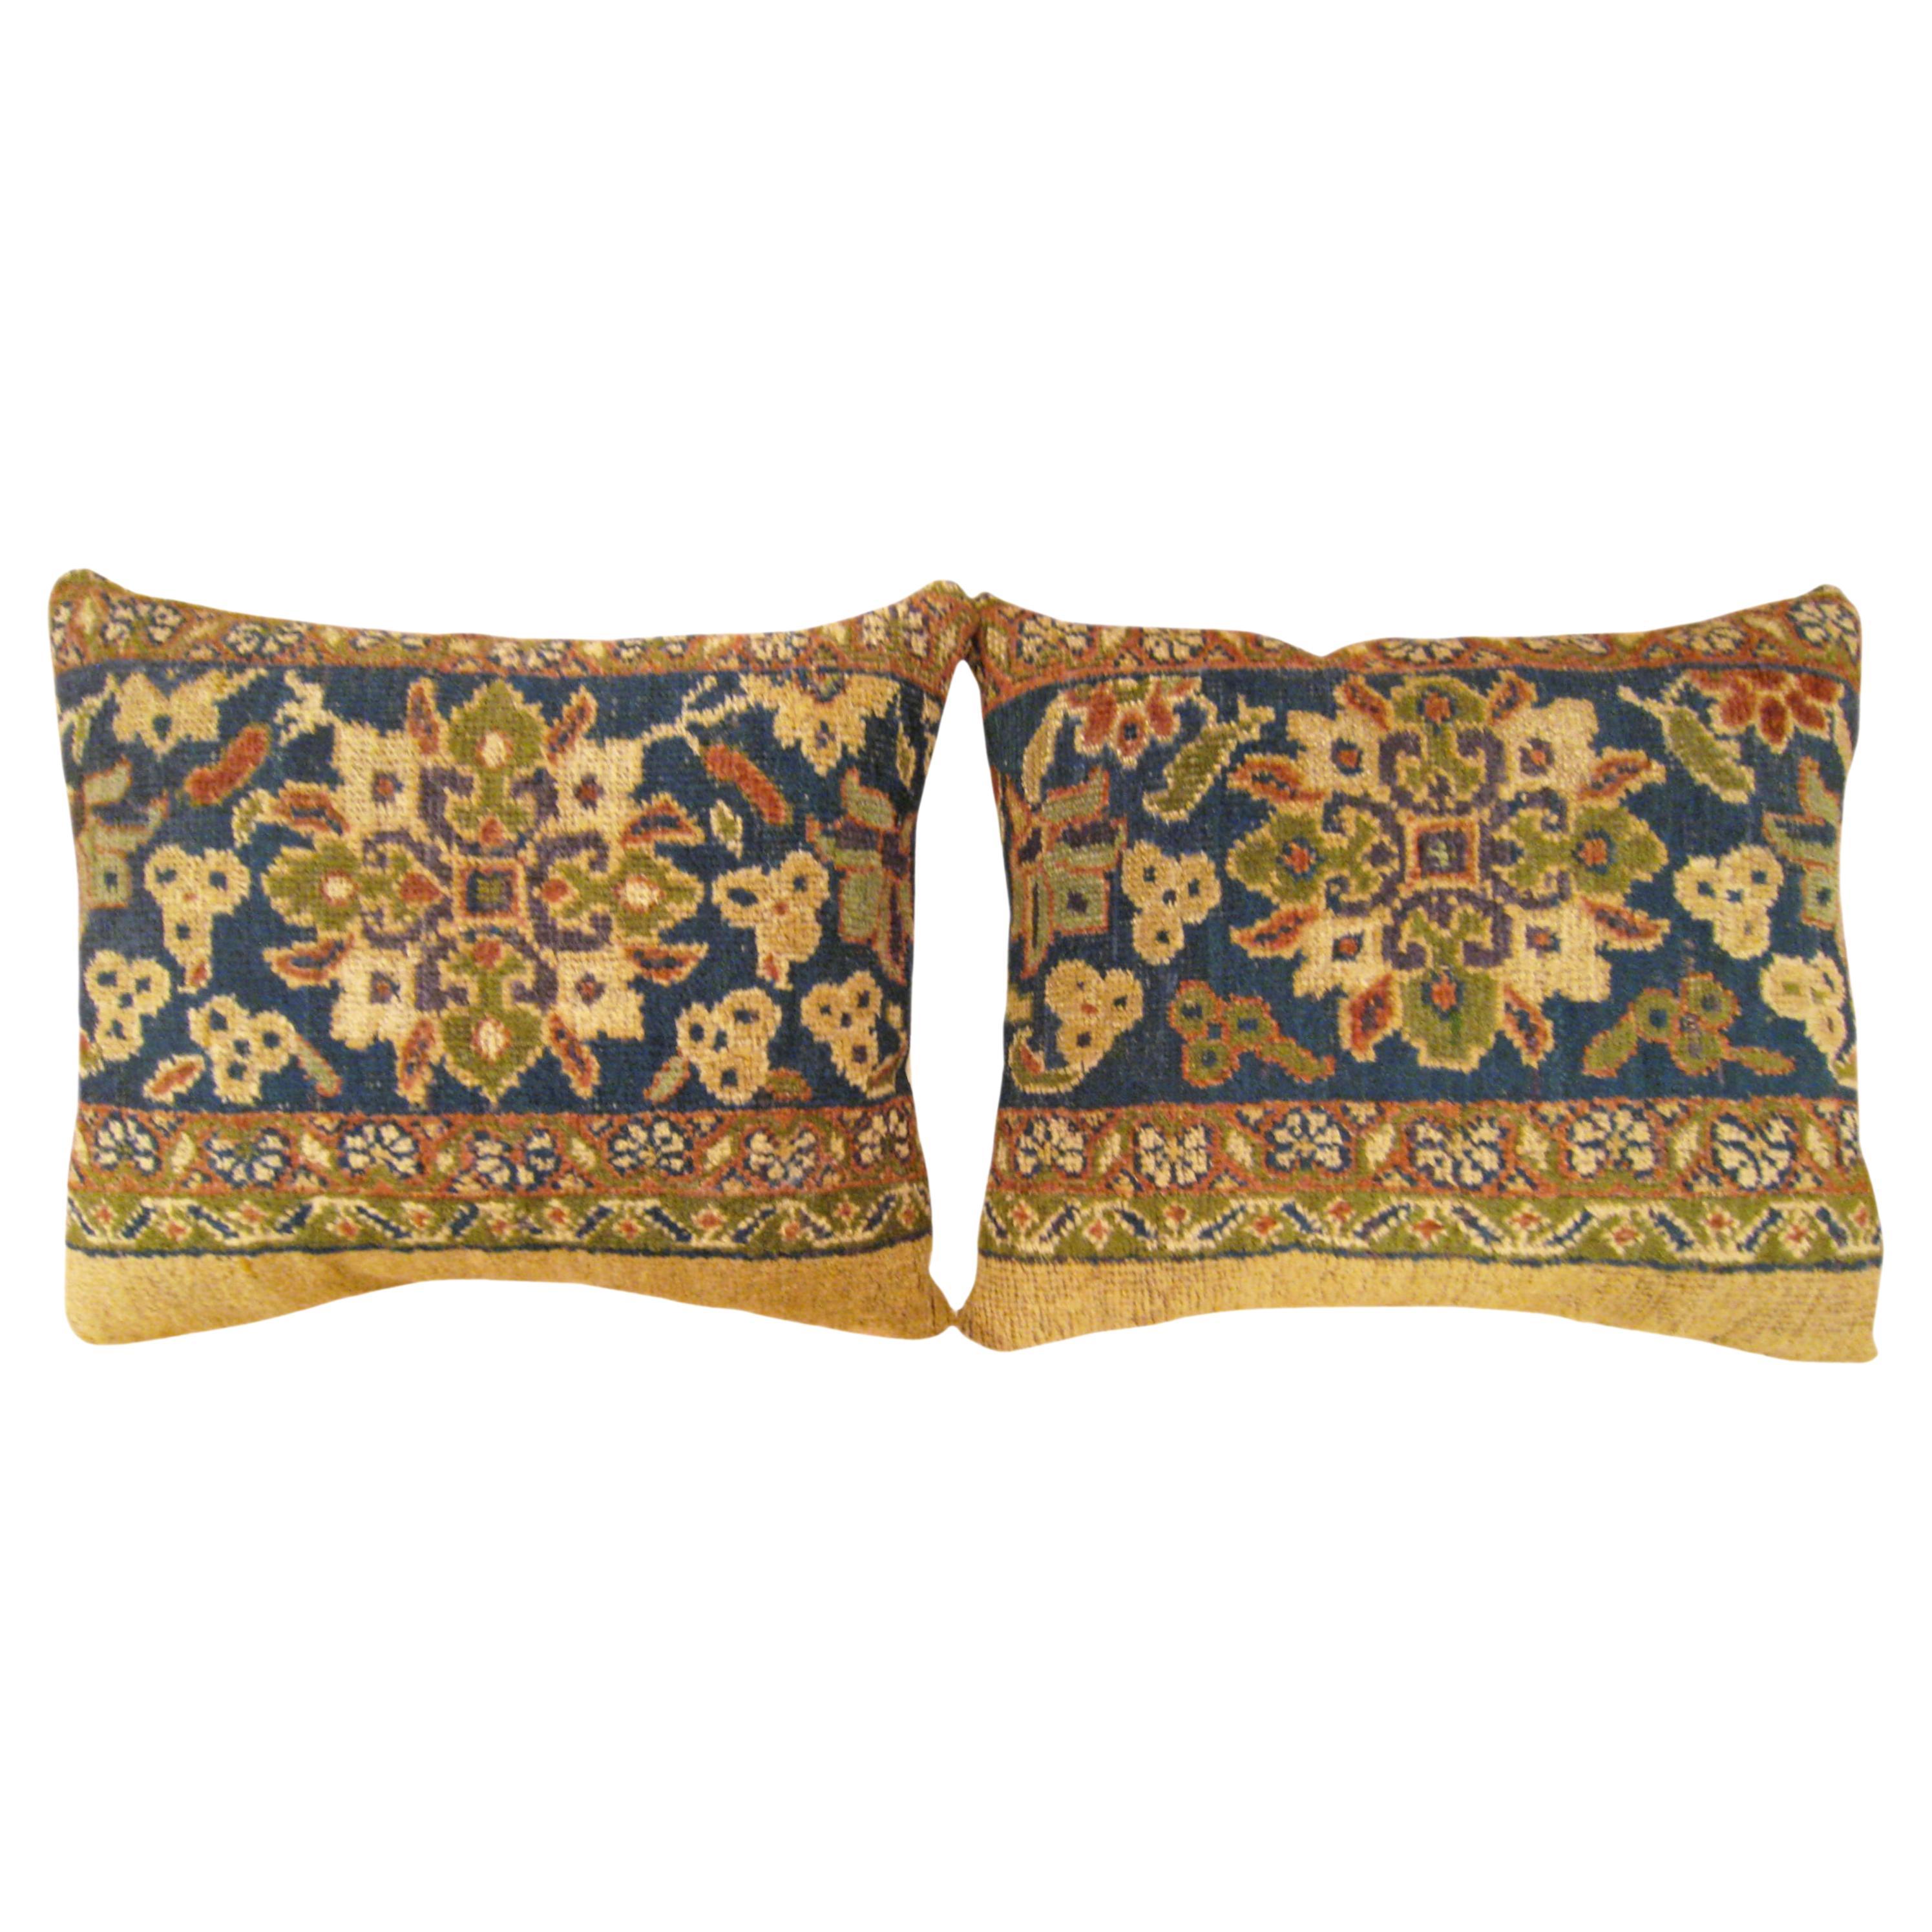 Pari of Decorative Antique Persian Sultanabad Carpet Pillows with Floral